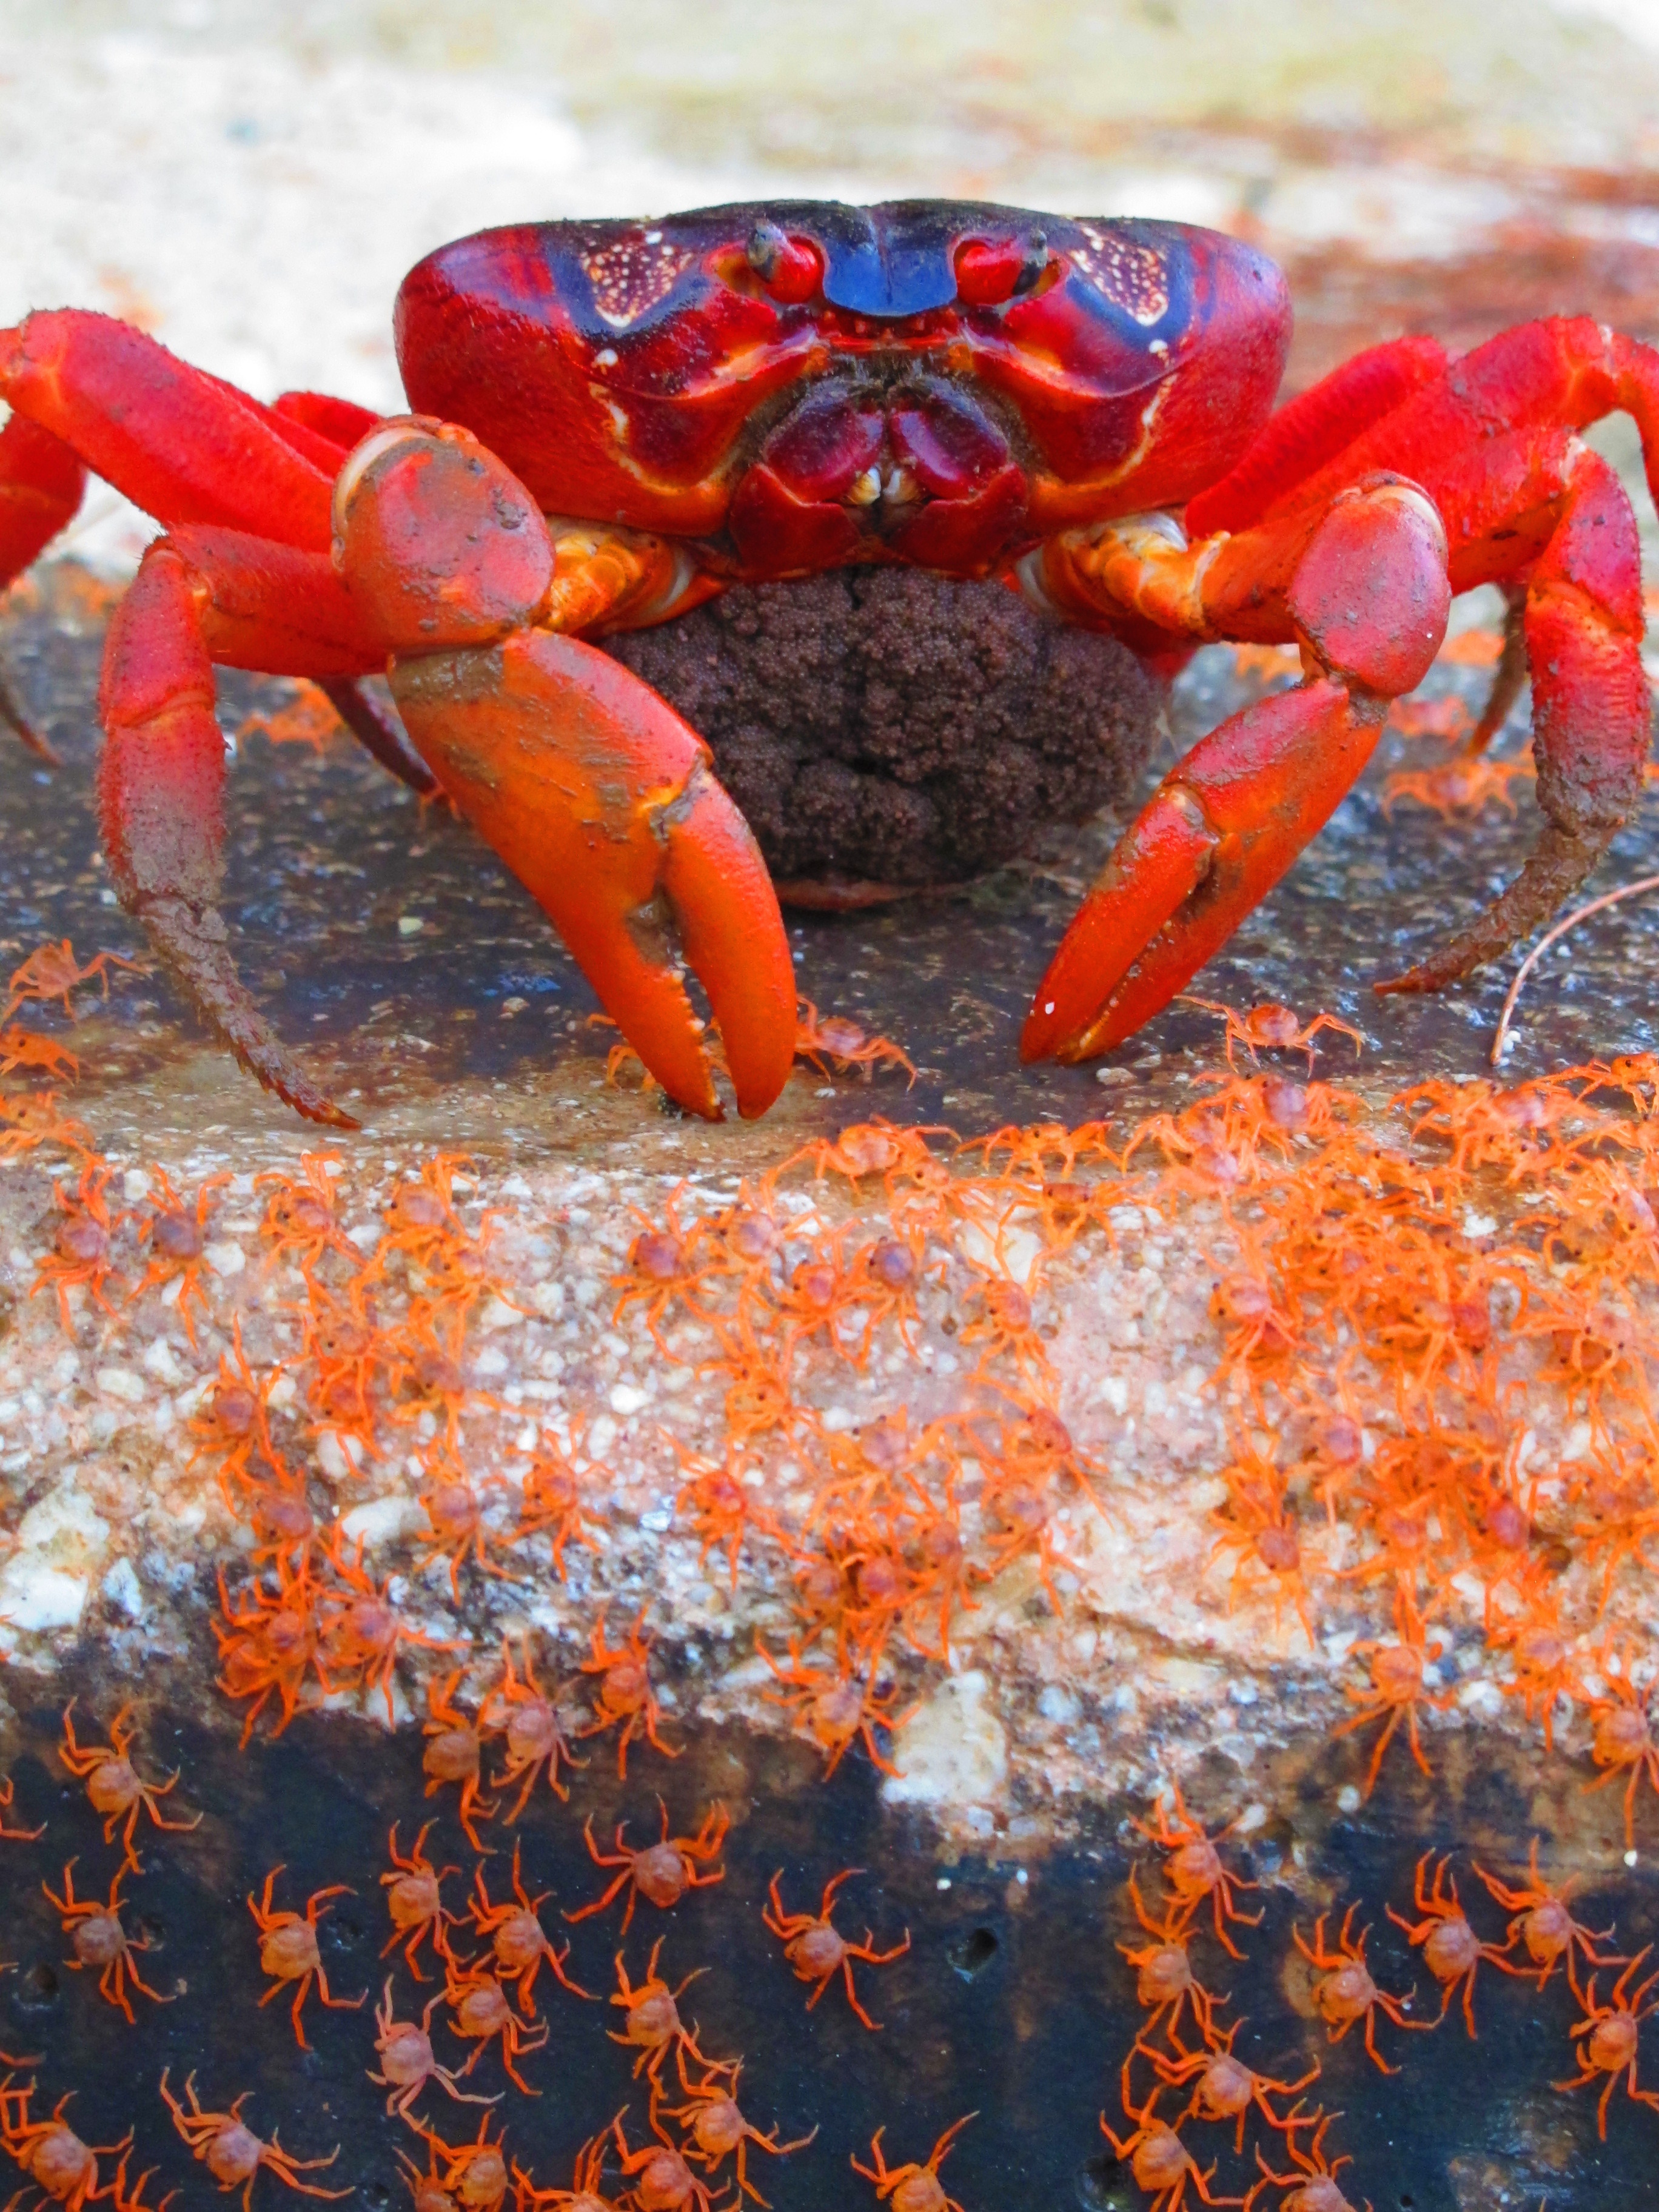 Christmas Island Red Crabs: Characteristics, reproduction and habits